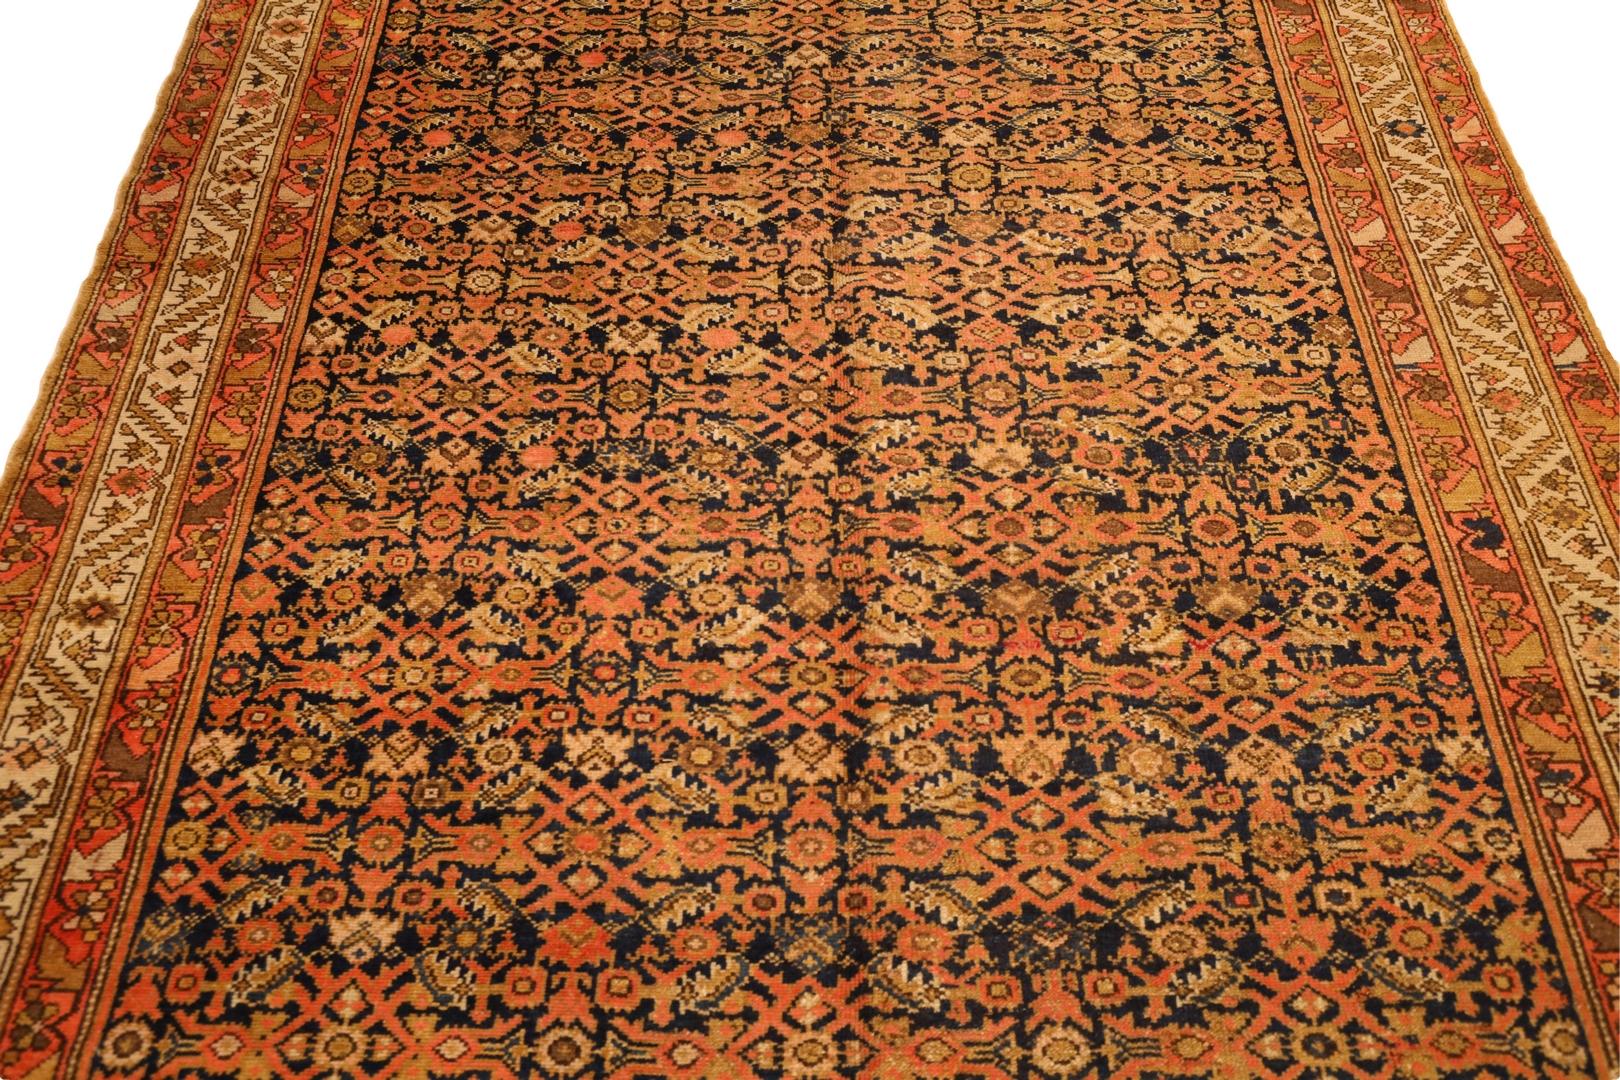 Malayer Semi-Antique Gallery Size Rug, Red Ivory Navy - 7 x 18 In Good Condition For Sale In New York, NY